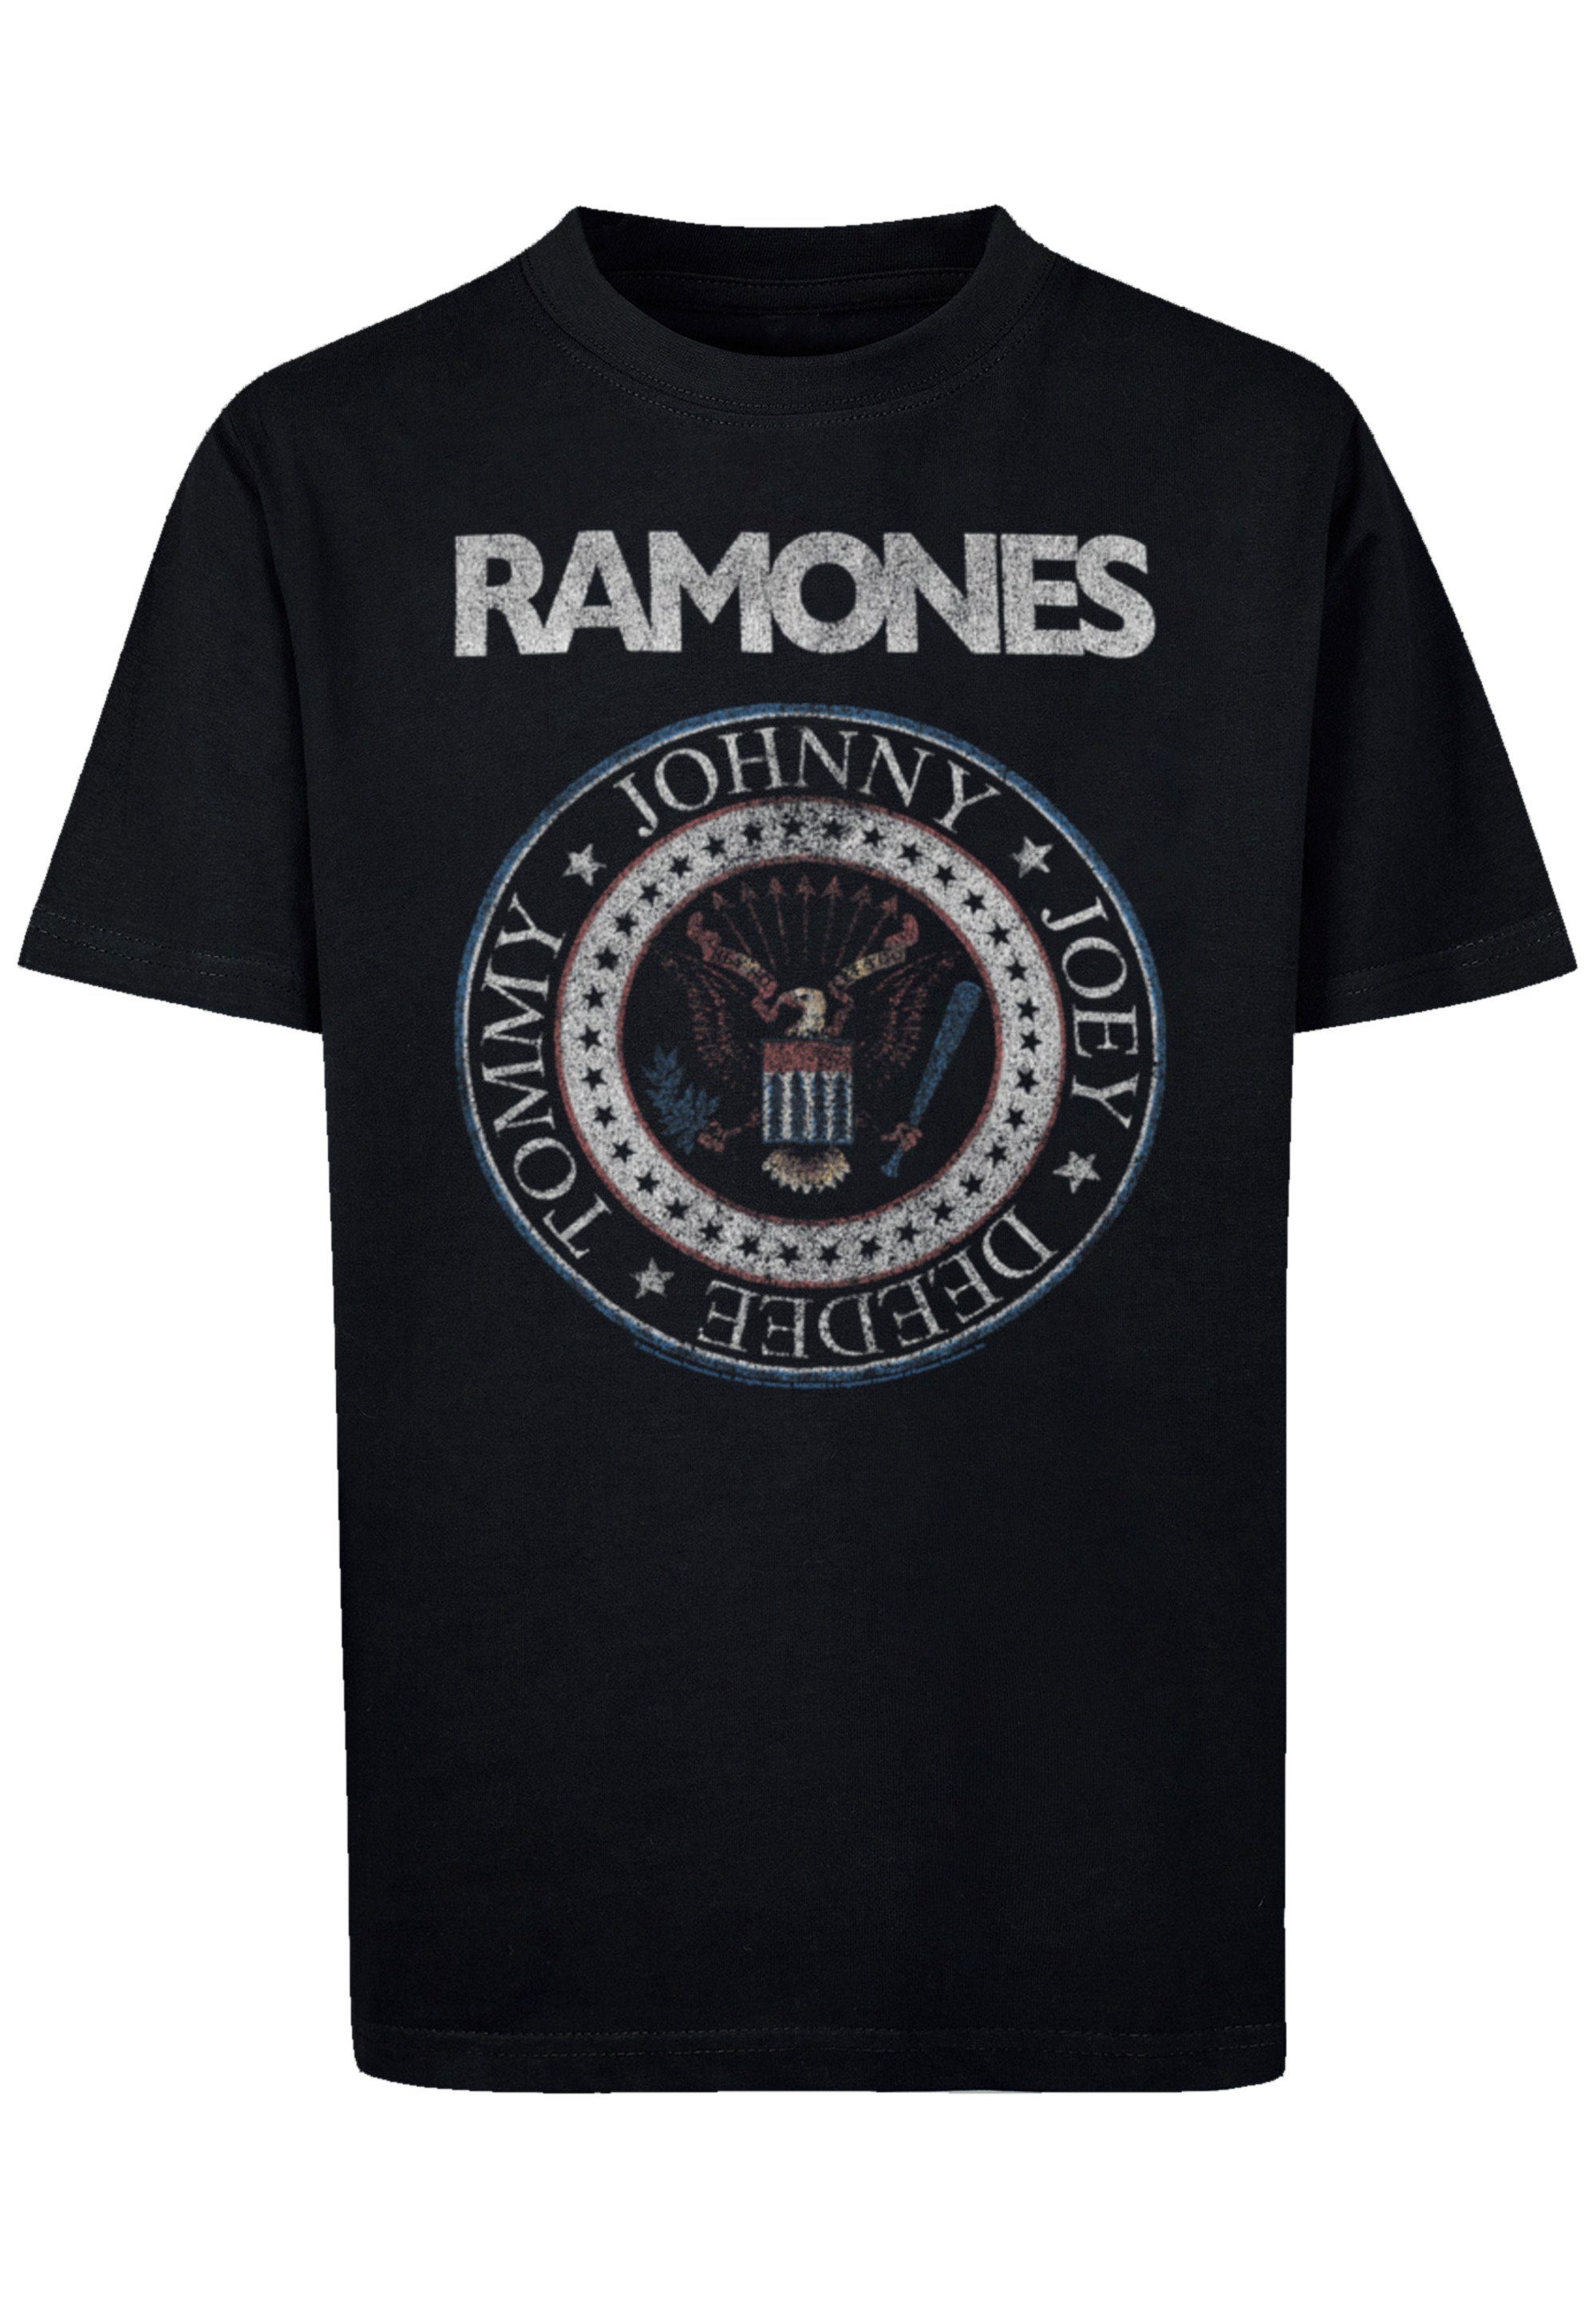 White Red F4NT4STIC And Rock-Musik Premium Band Rock T-Shirt Seal Band, Qualität, Musik Ramones